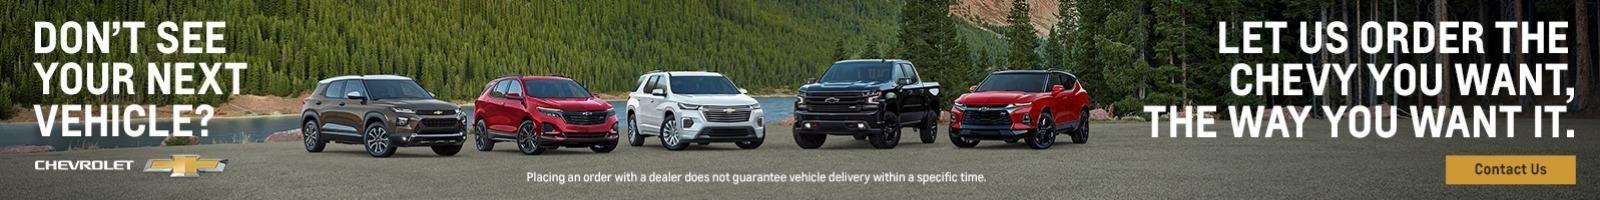 Not finding your next vehicle. Let us order you the Chevy you want, the way you want it.